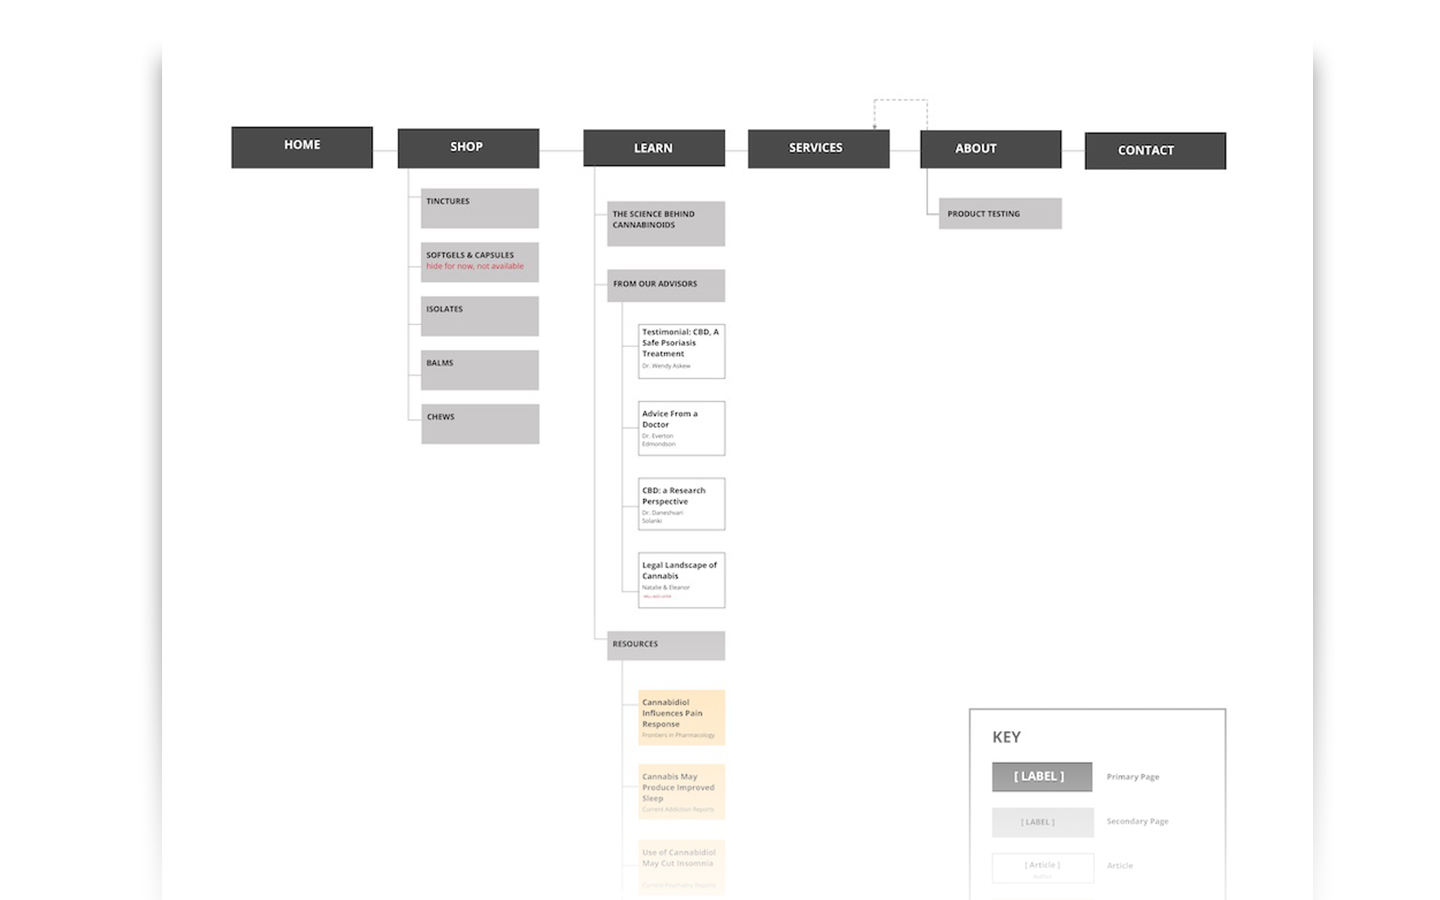 The sitemap that I created for this project